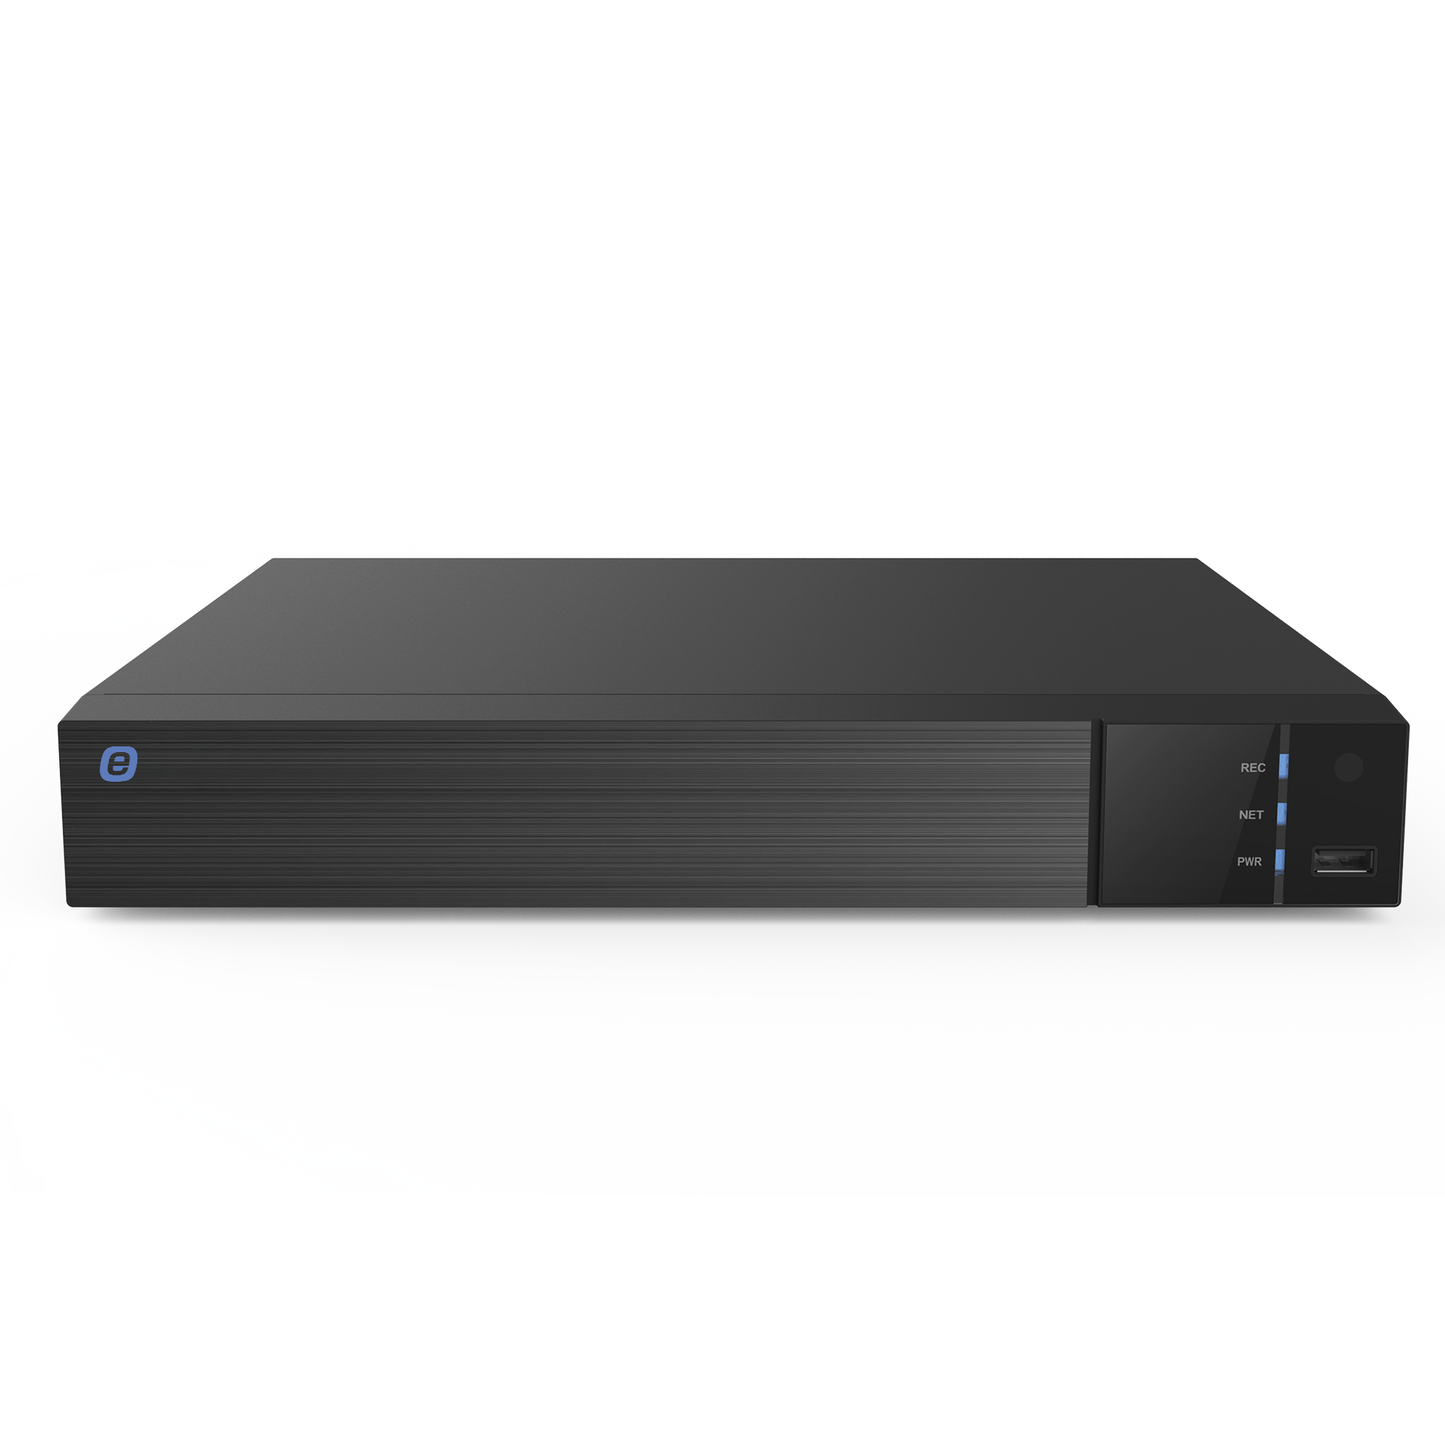 [ Face Recognition ] NVR 8MP (4K) / 8 Channels IP / 8 POE Ports / Support 1 Hard Disk / Video Output in 4K / H.265+ / Cloud Video Recording